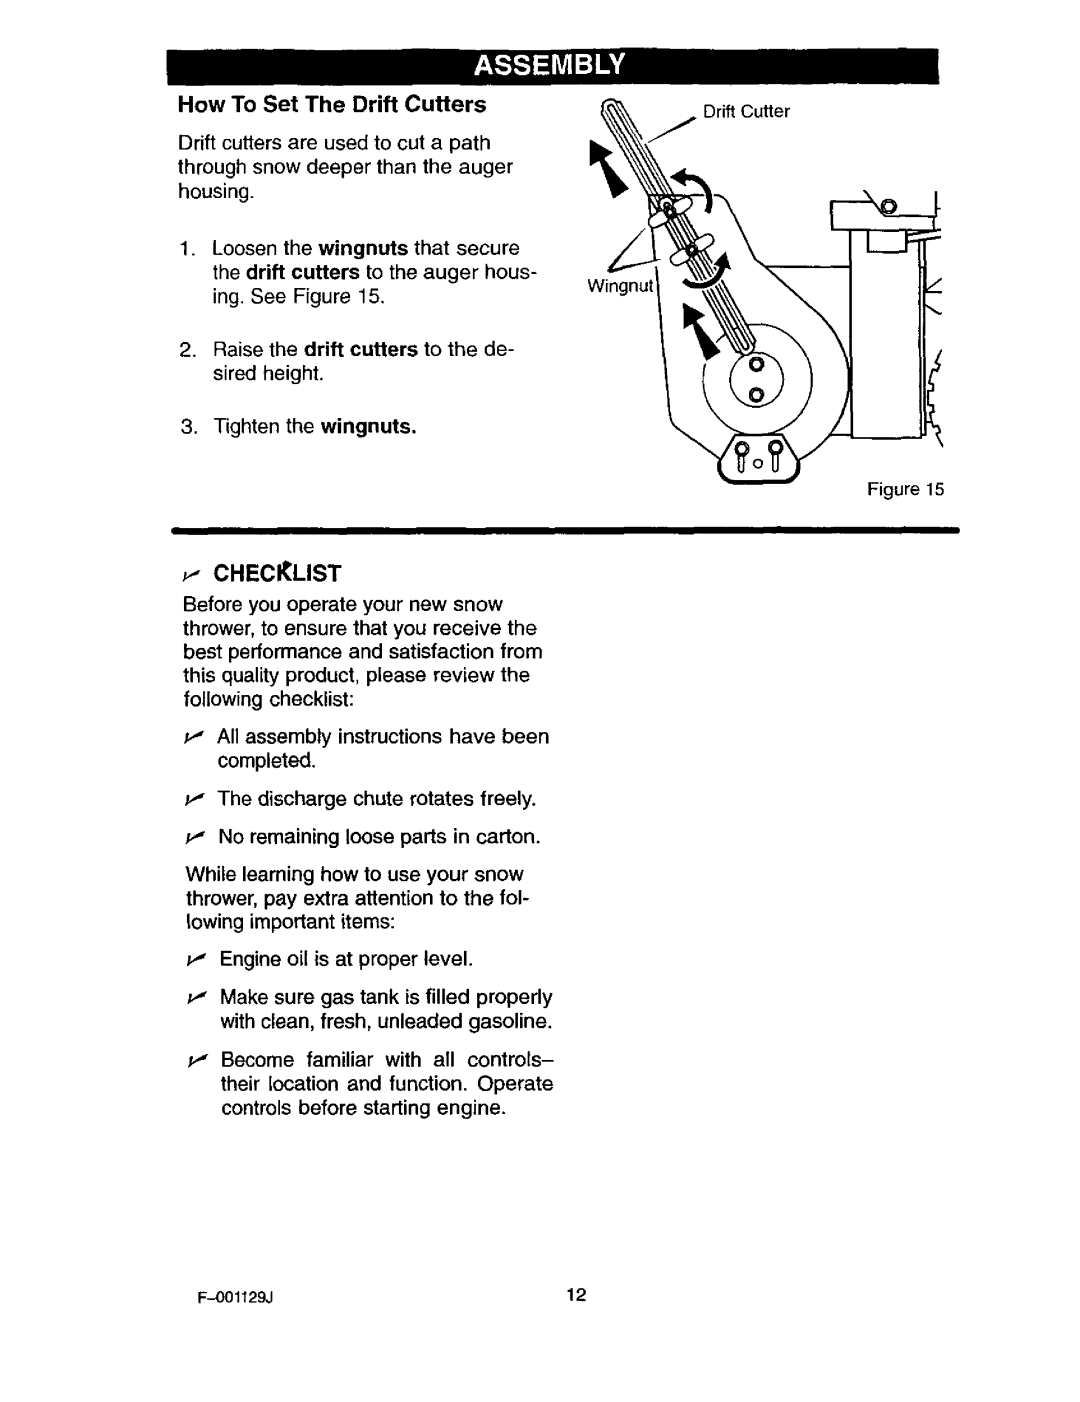 Craftsman 536.88112 operating instructions How To Set The Drift Cutters, Checklist 